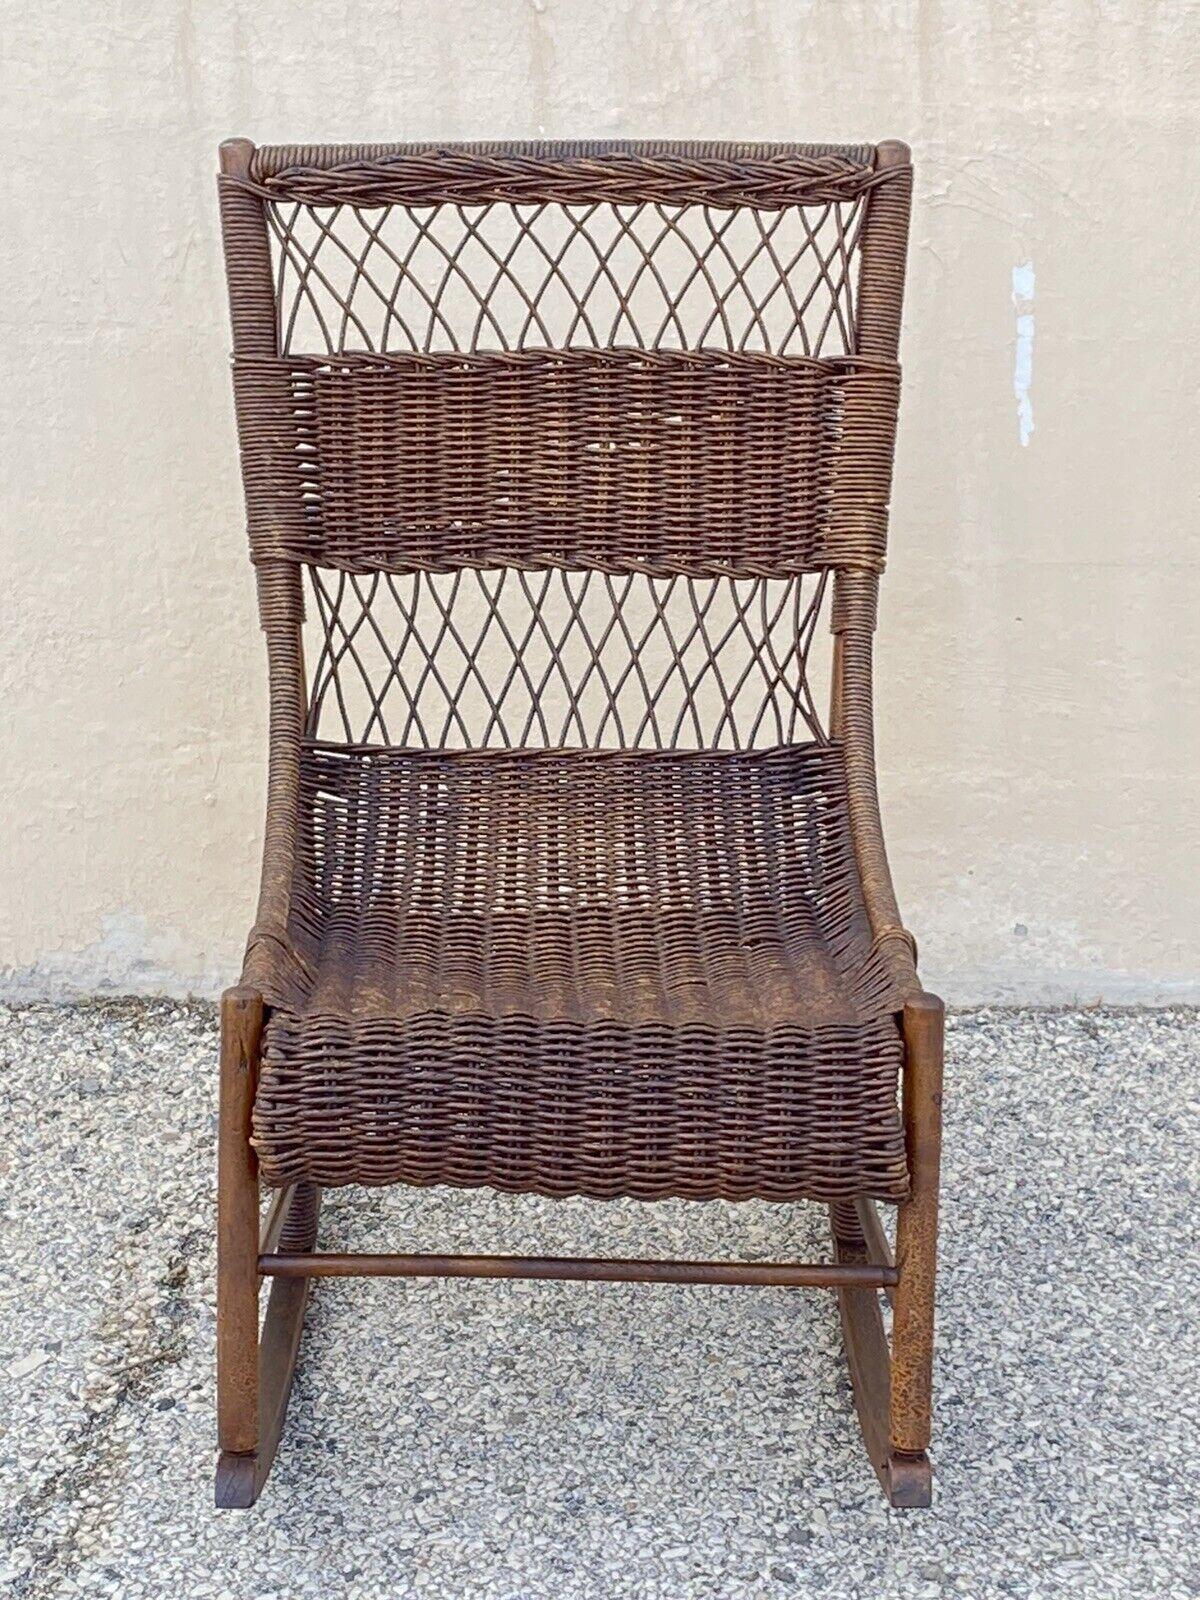 Antique Wicker and Rattan Wooden Victorian Rocking Chair Rocker. Item features a solid wood wicker wrapped frame, very nice antique, quality American craftsmanship, great style and form. Circa 19th Century. Measurements: 34